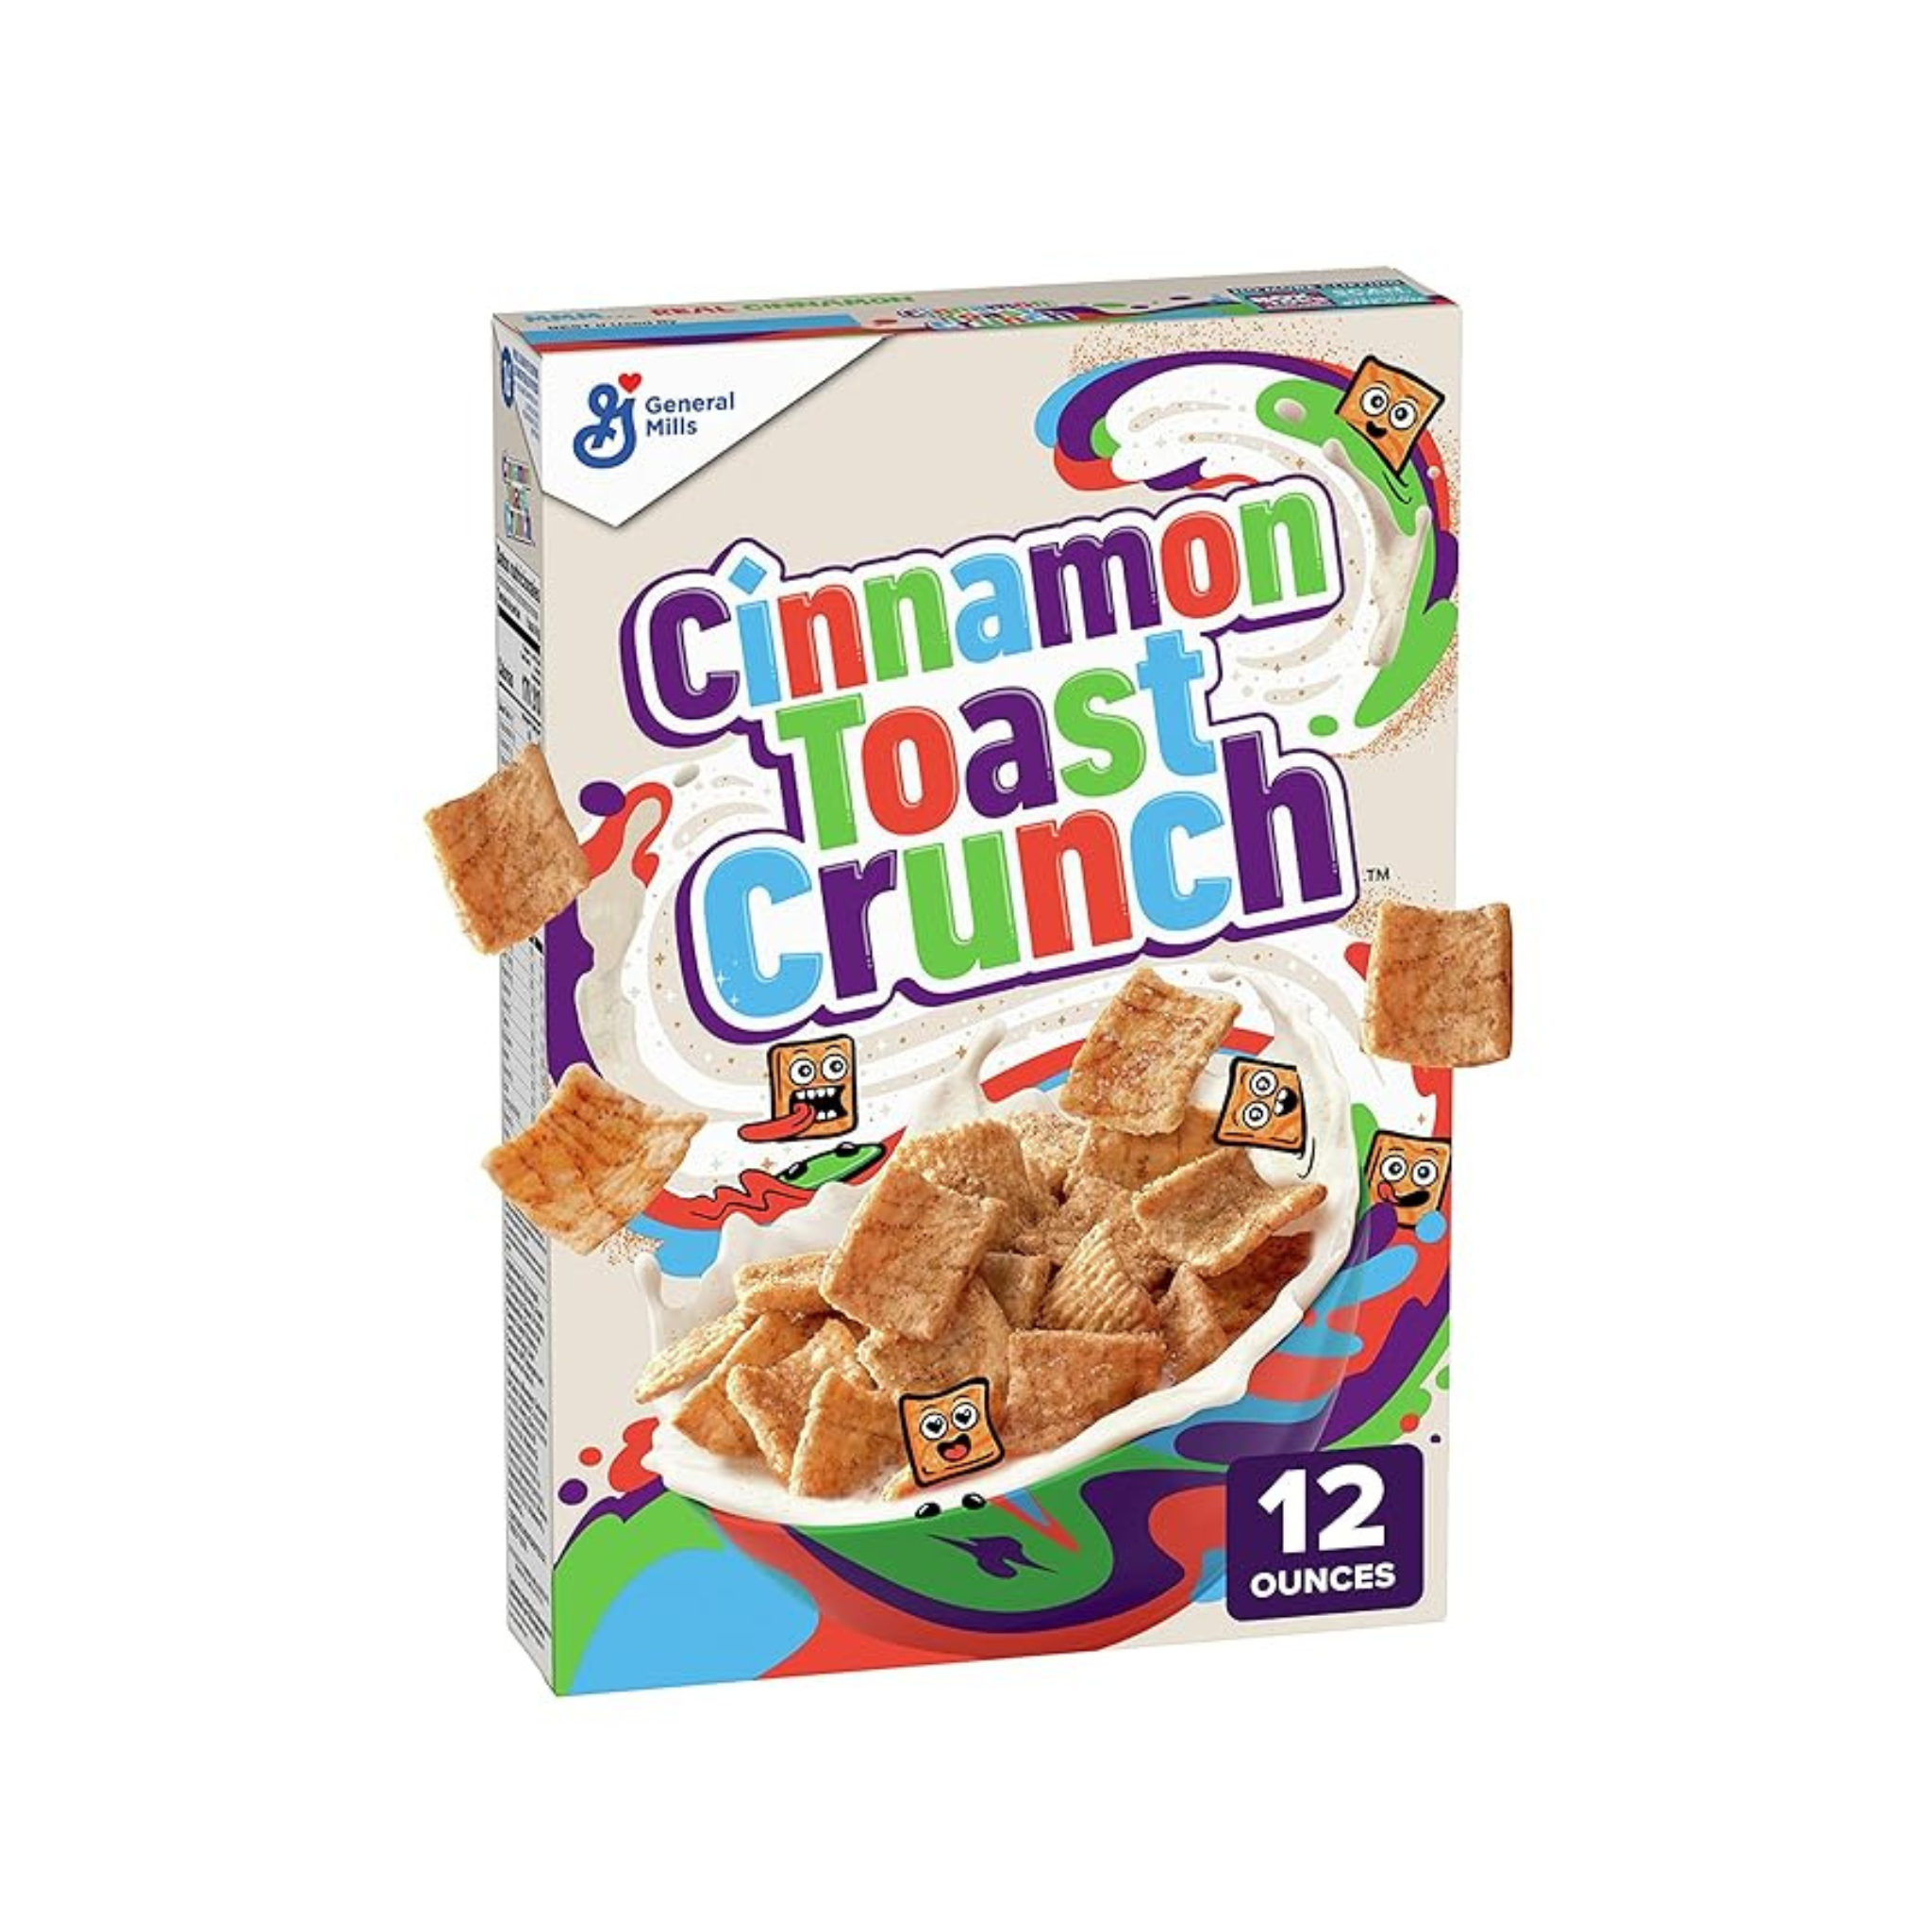 Save on Cocoa Puffs, Cinnamon Toast Crunch, Chex Rice and Corn Cereals